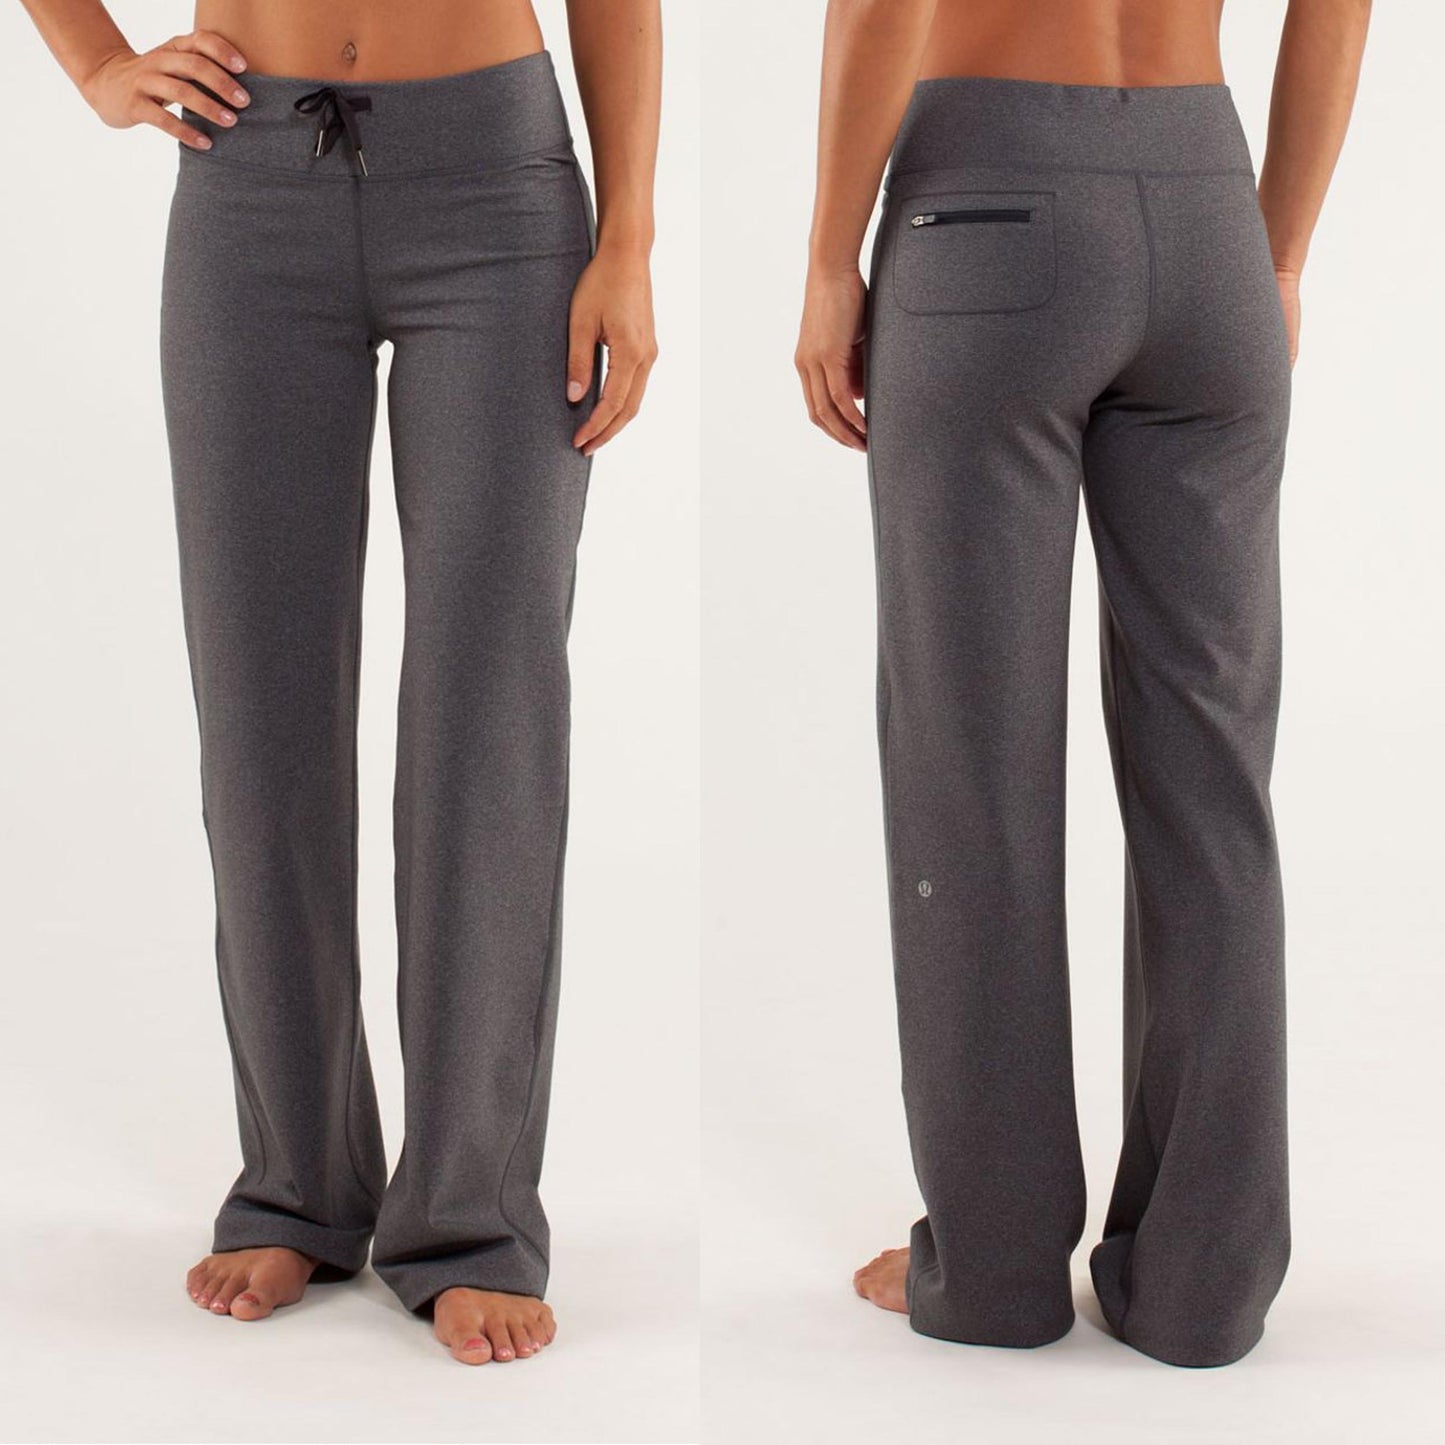 lululemon relaxed fit drawstring pants in deep heathered coal - size 4